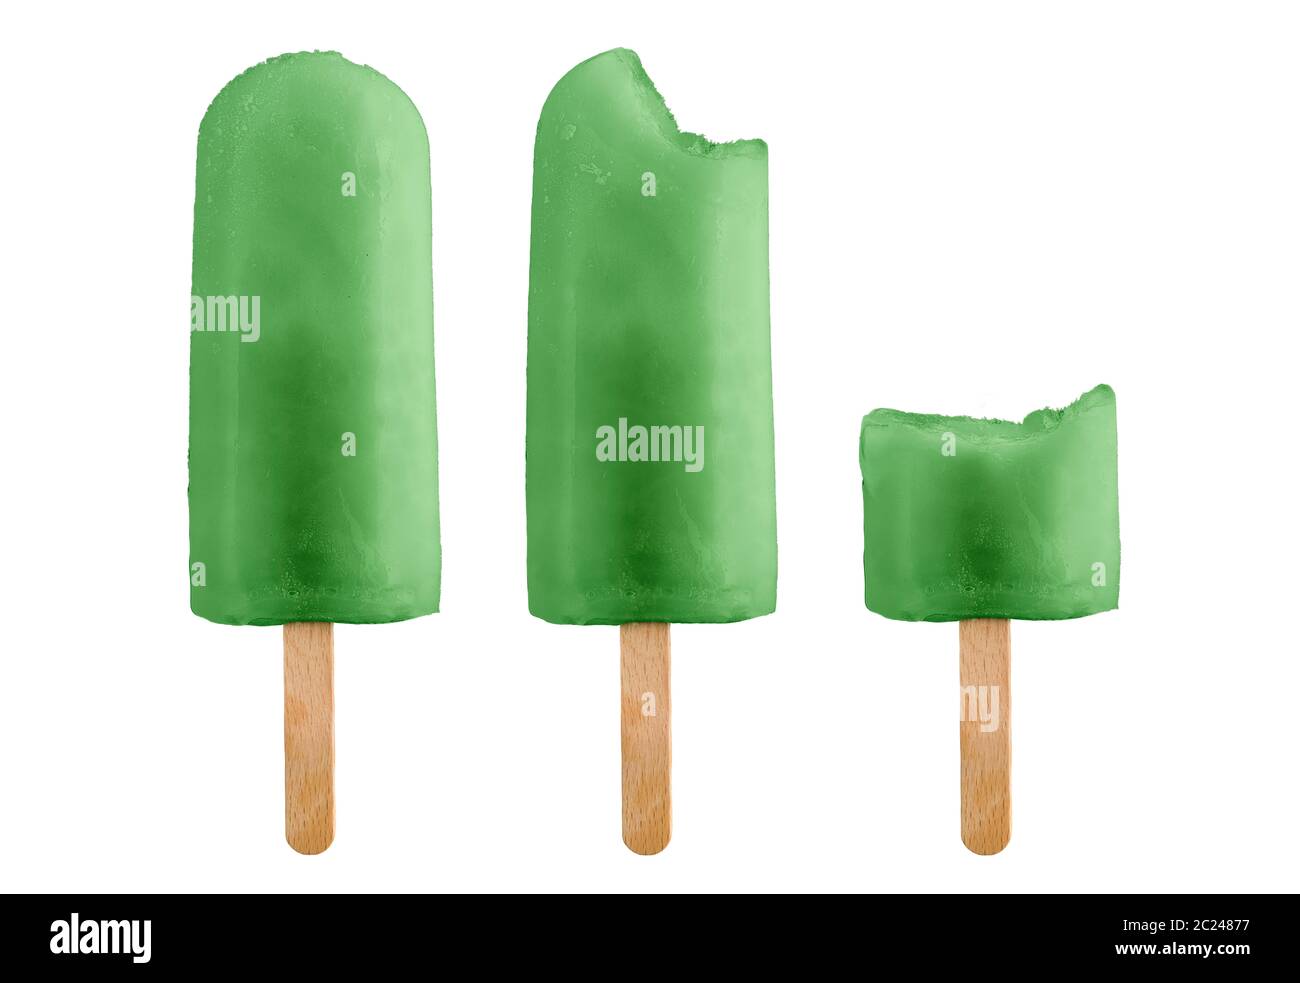 mint bitten ice lolly, isolated on white background Stock Photo